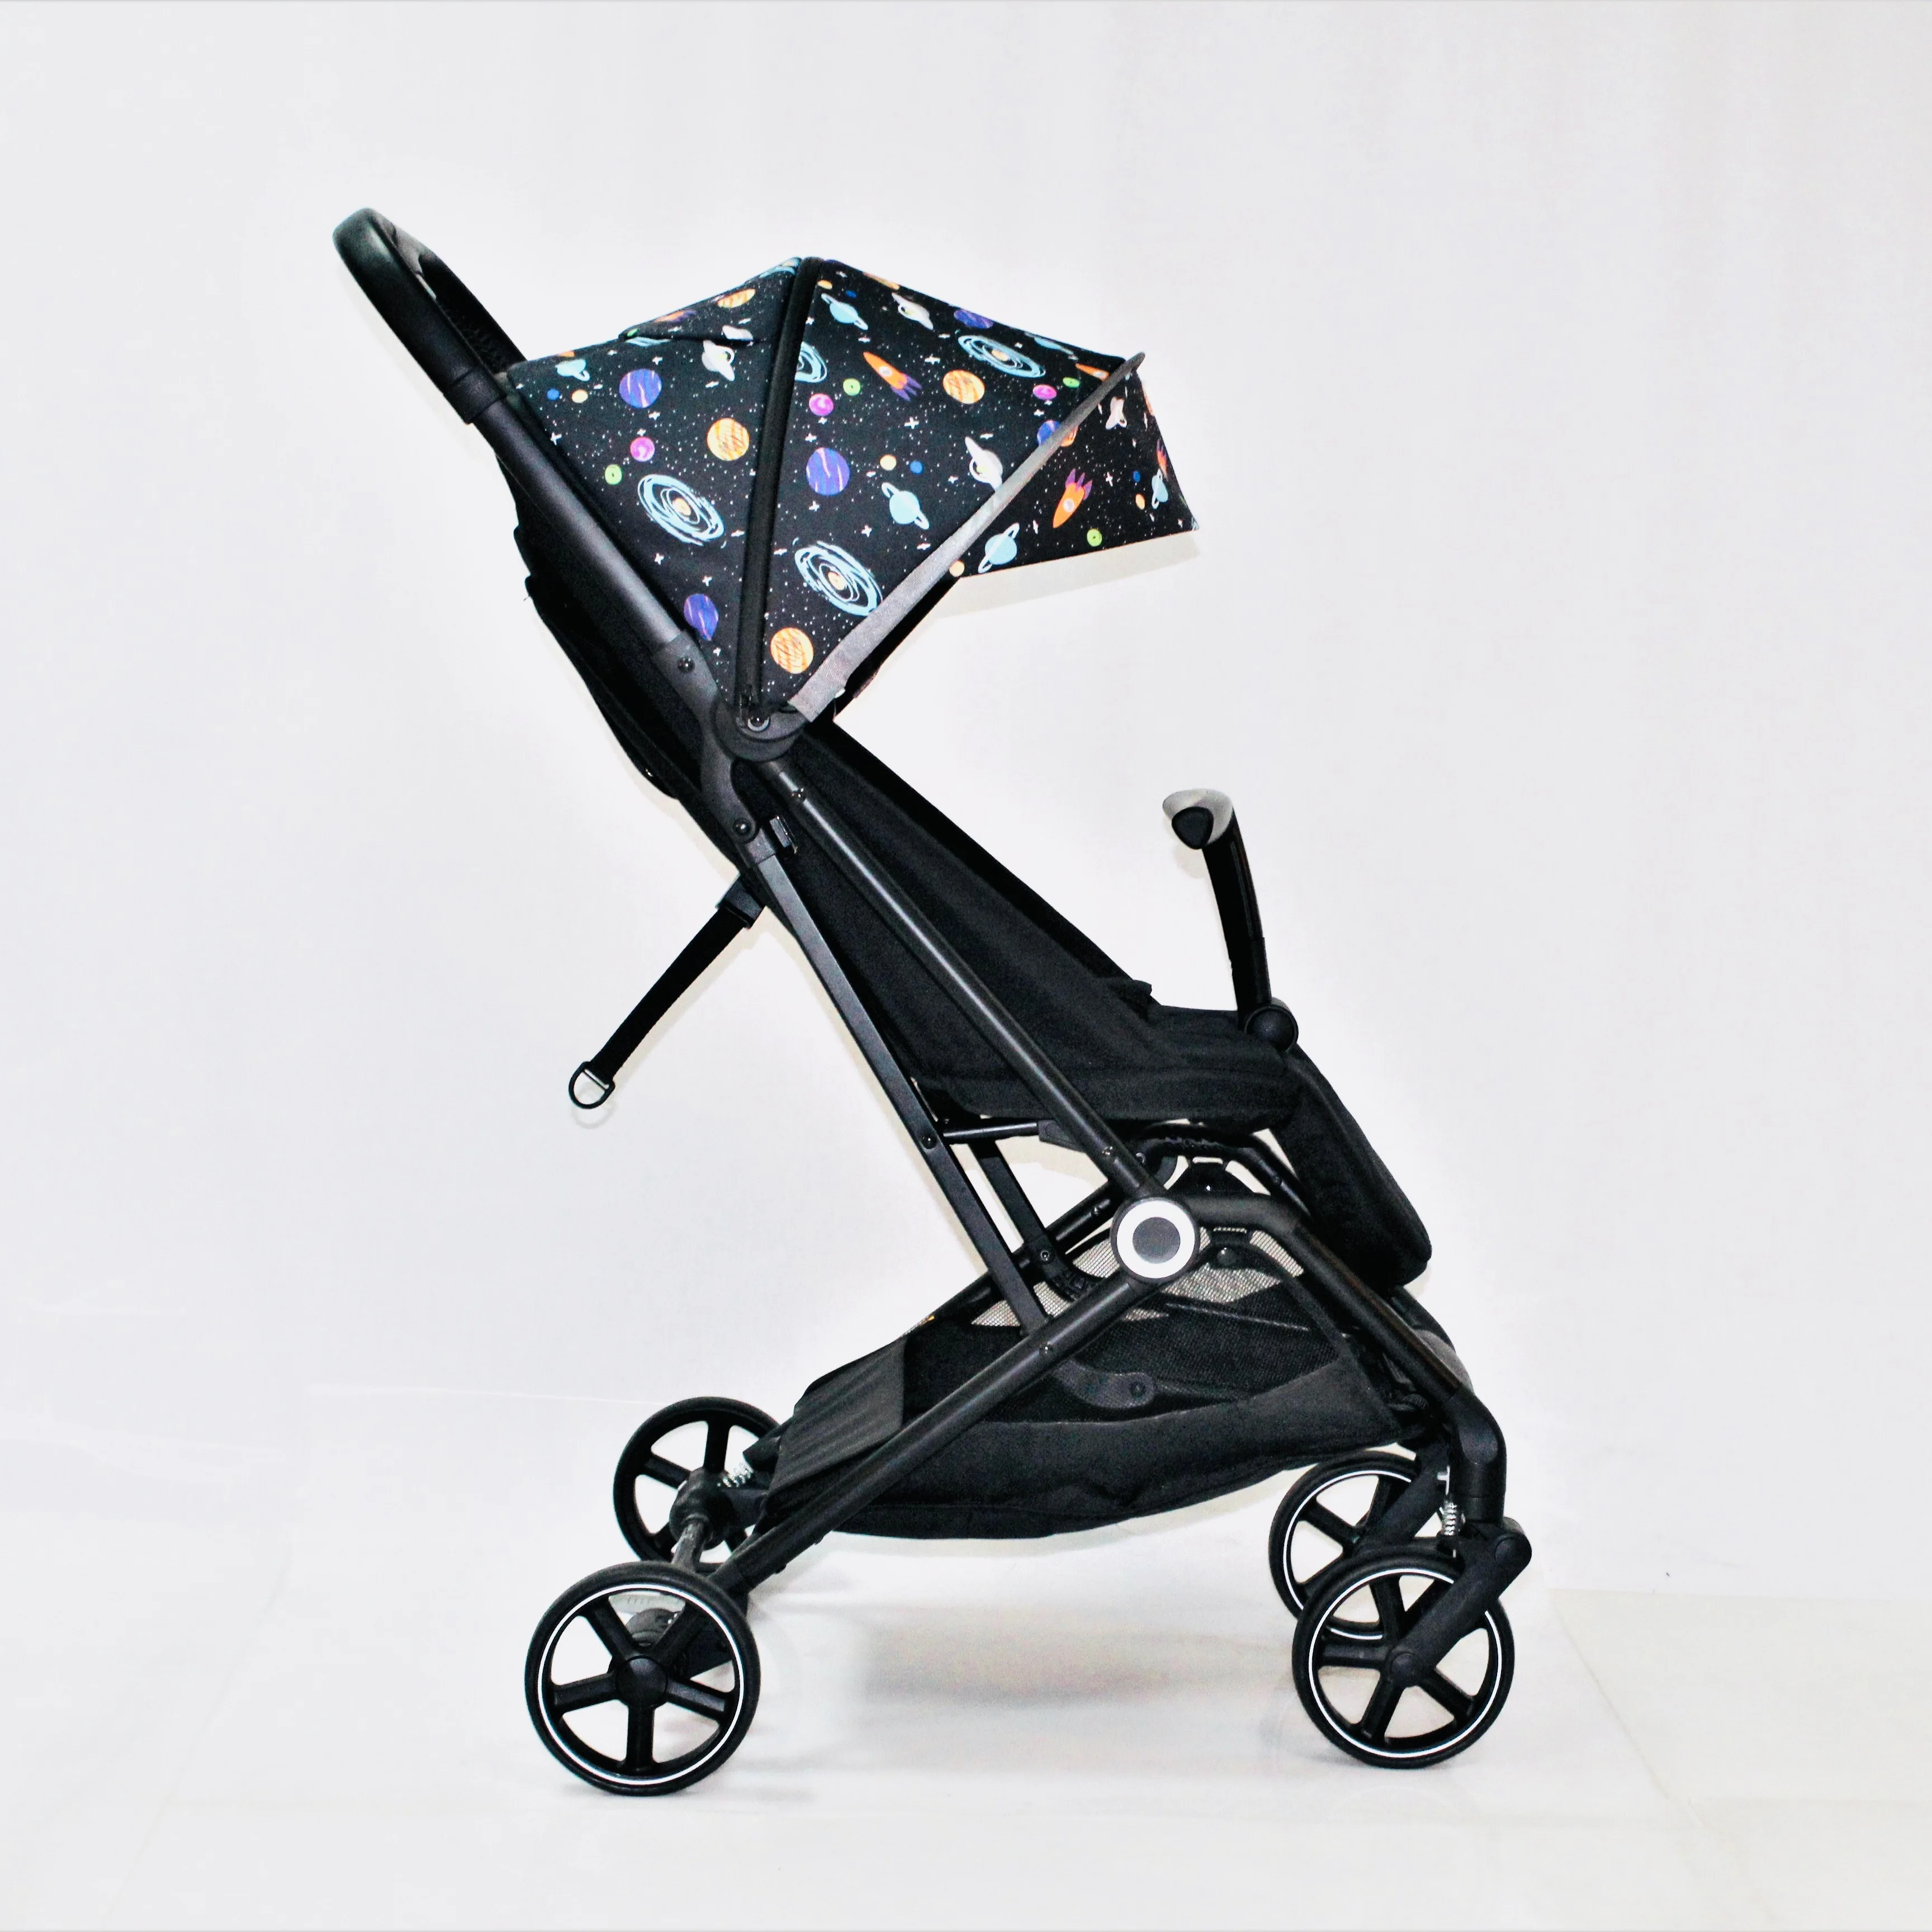 

Brightbebe compact luxury one-hand-fold lightweight travel buggy stroller easy auto folding